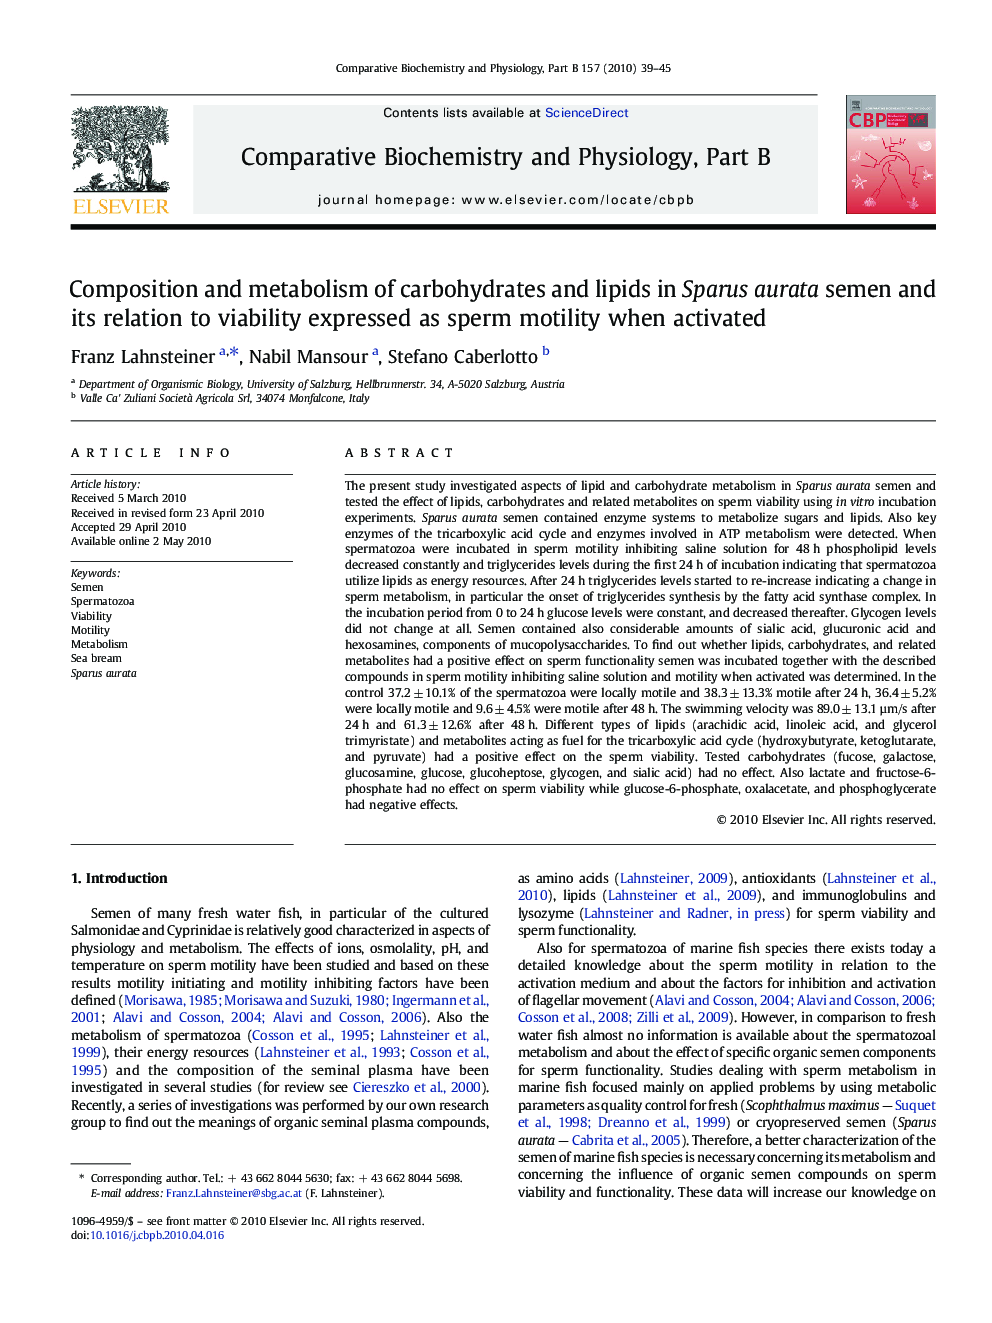 Composition and metabolism of carbohydrates and lipids in Sparus aurata semen and its relation to viability expressed as sperm motility when activated